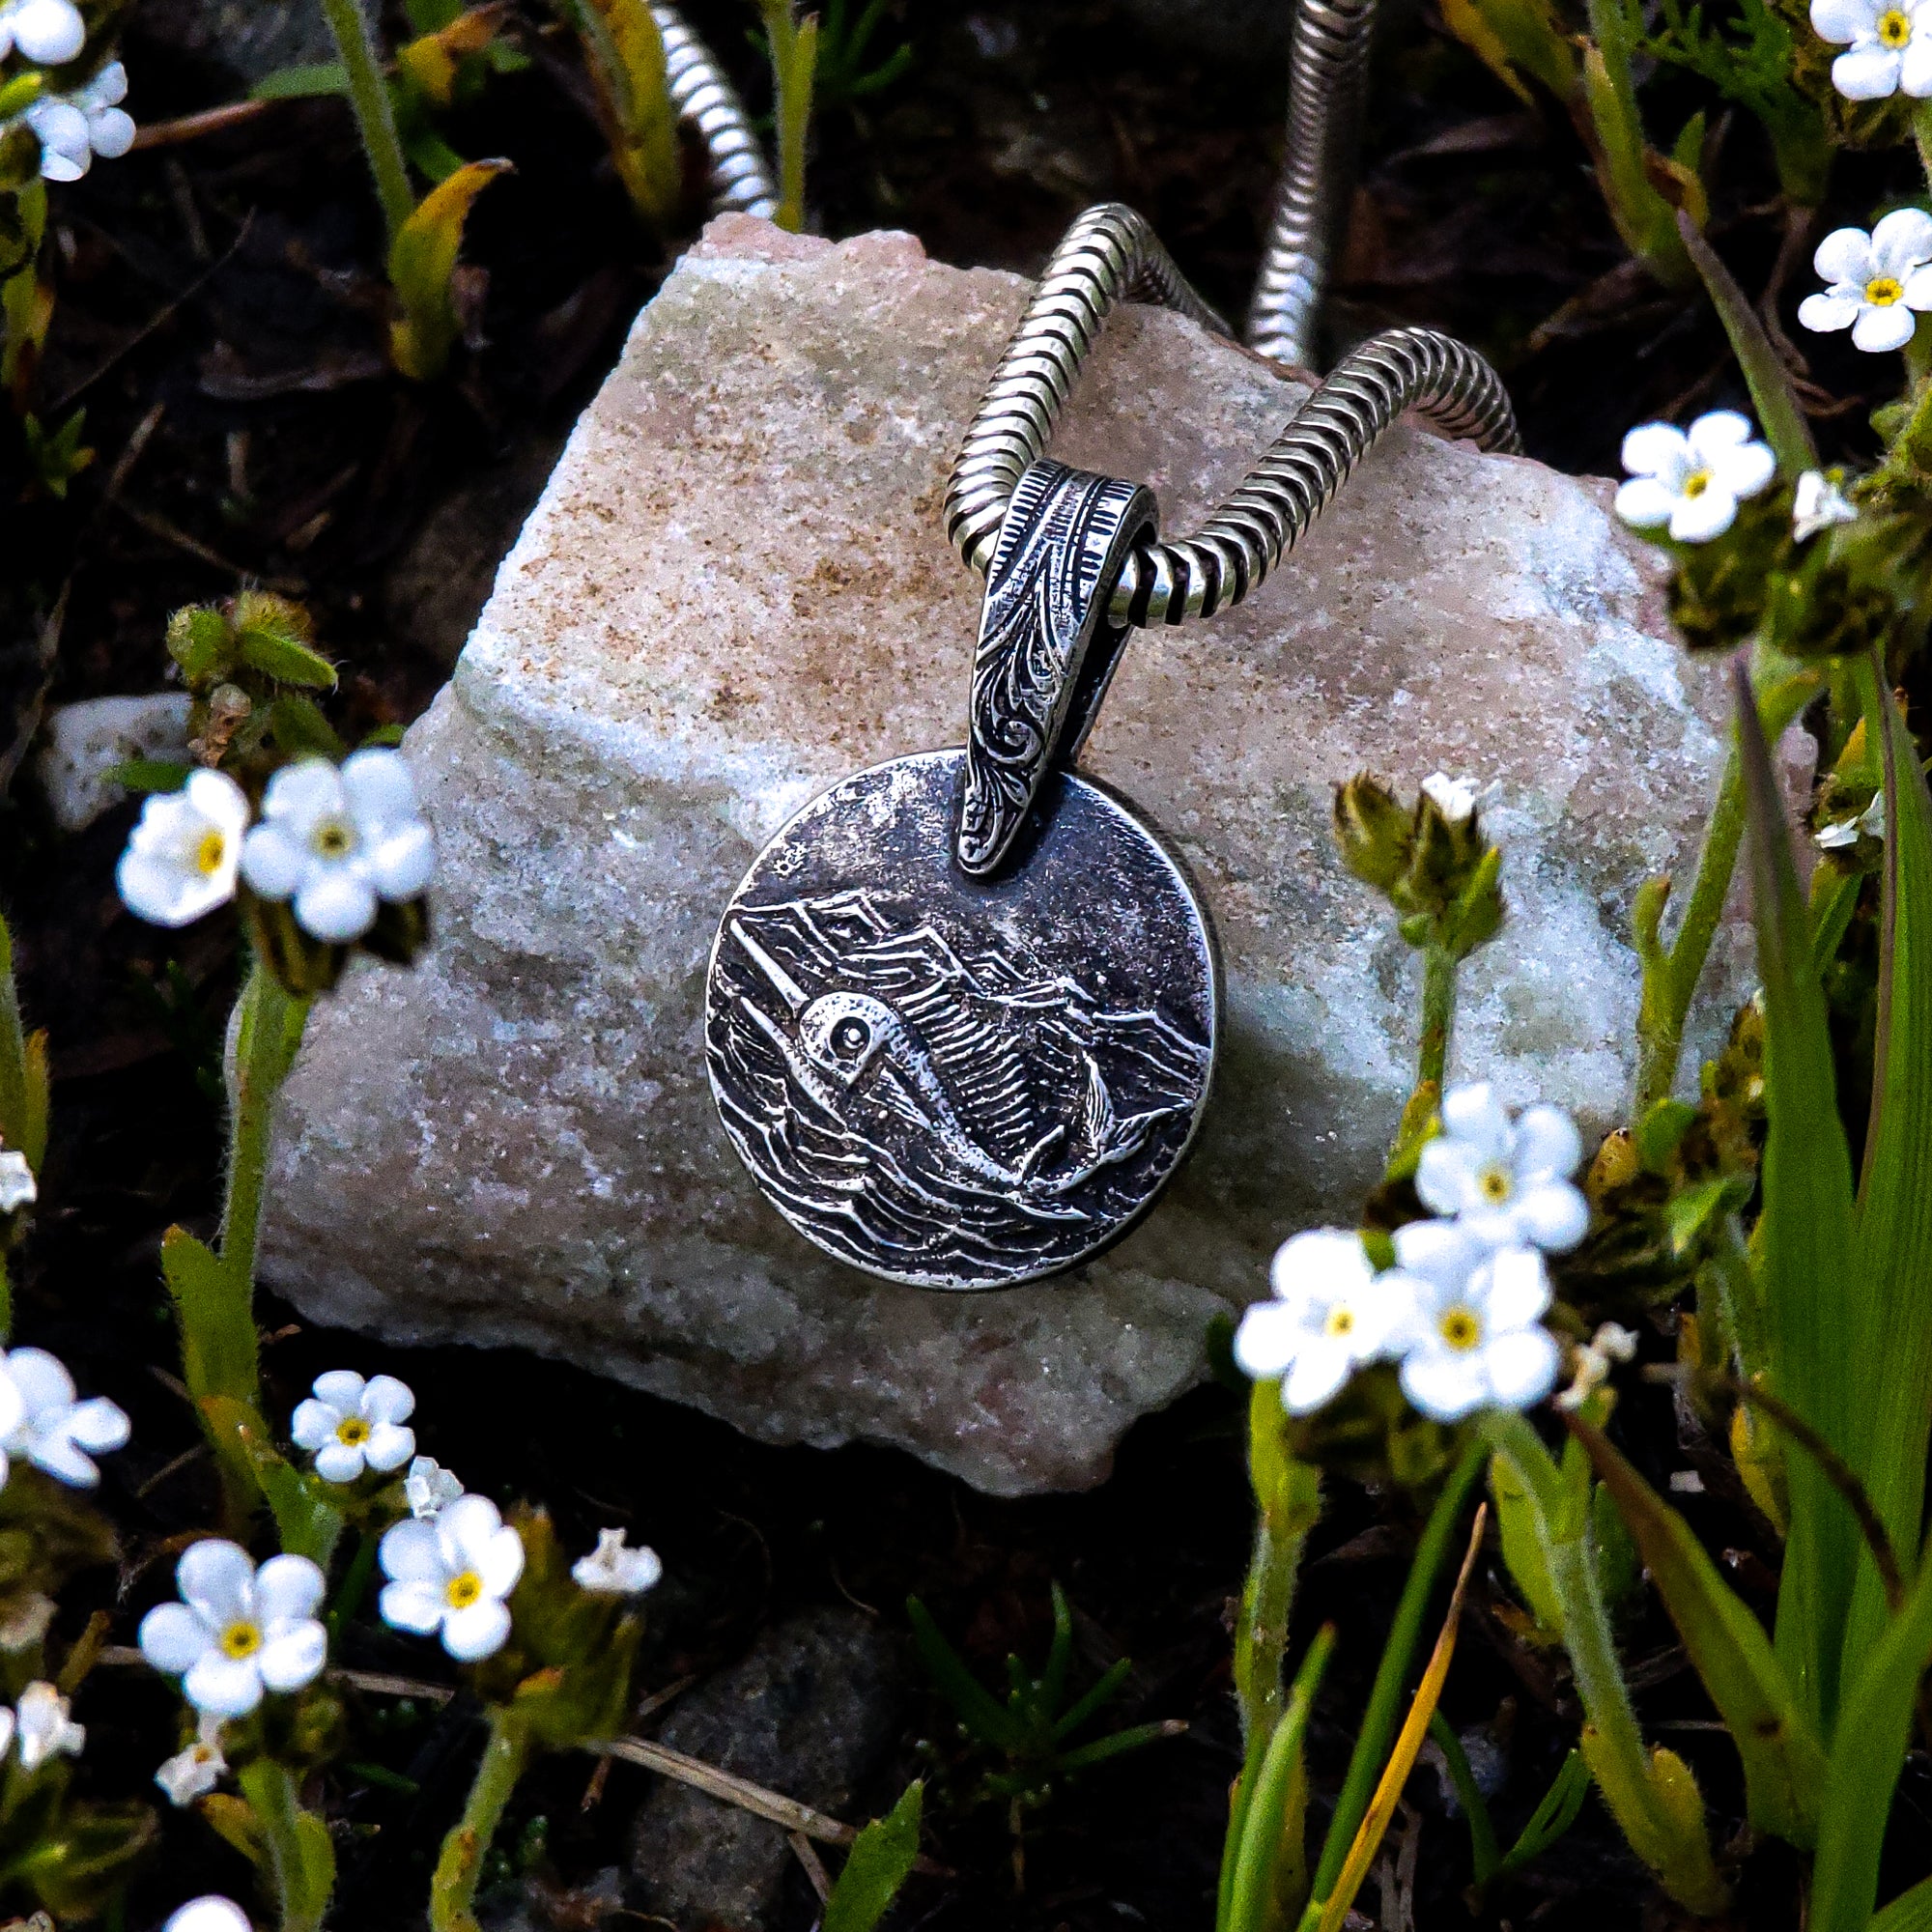 This photo showcases our handmade solid sterling silver Swordfish in Silver Seas pendant. The detailed design features a swordfish swimming in a stormy ocean. The pendant is resting on a beige rock and surrounded by tiny white flowers.